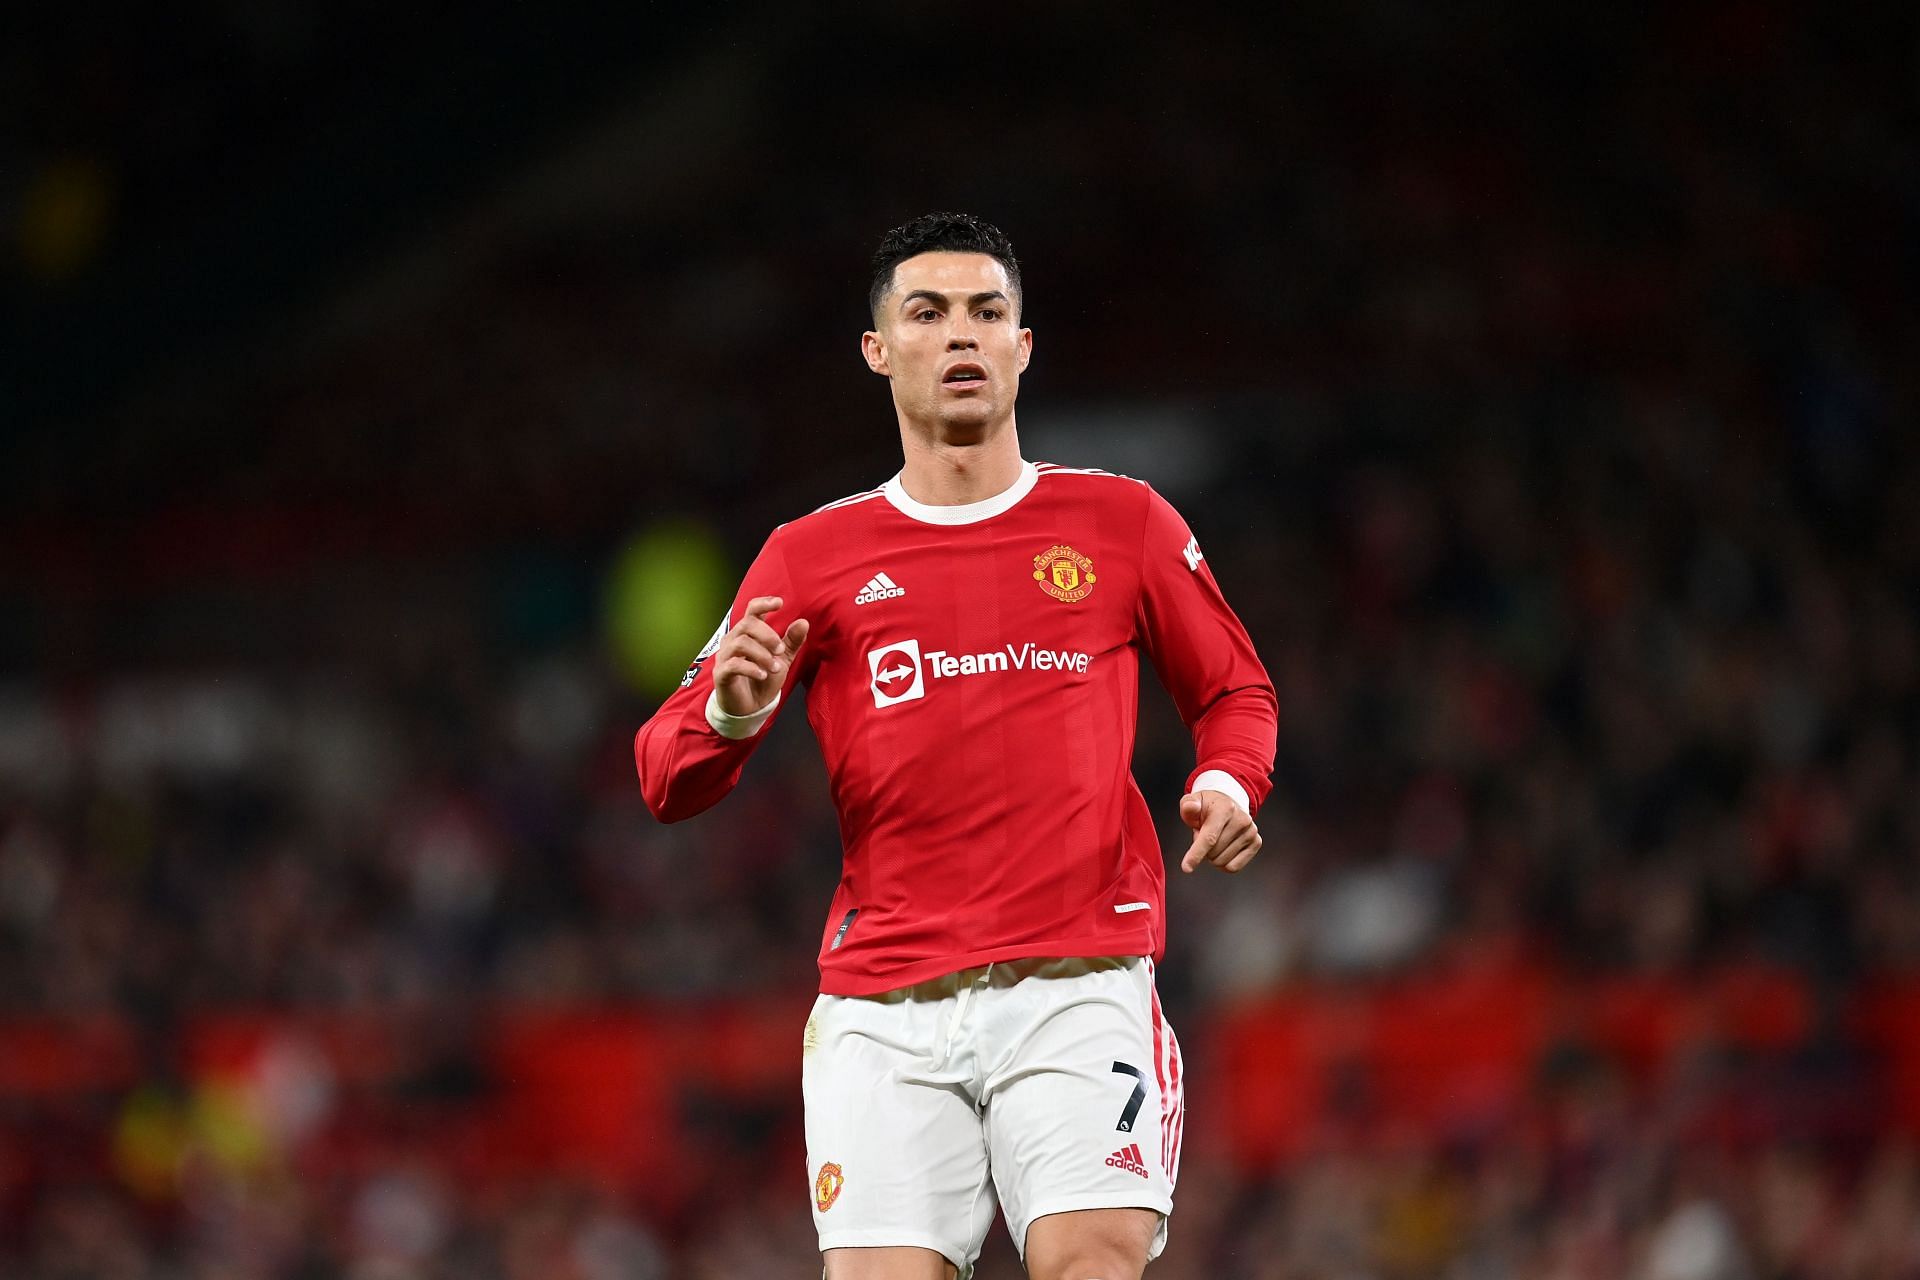 Ian Ladyman has tipped Ronaldo to become the next Manchester United captain.